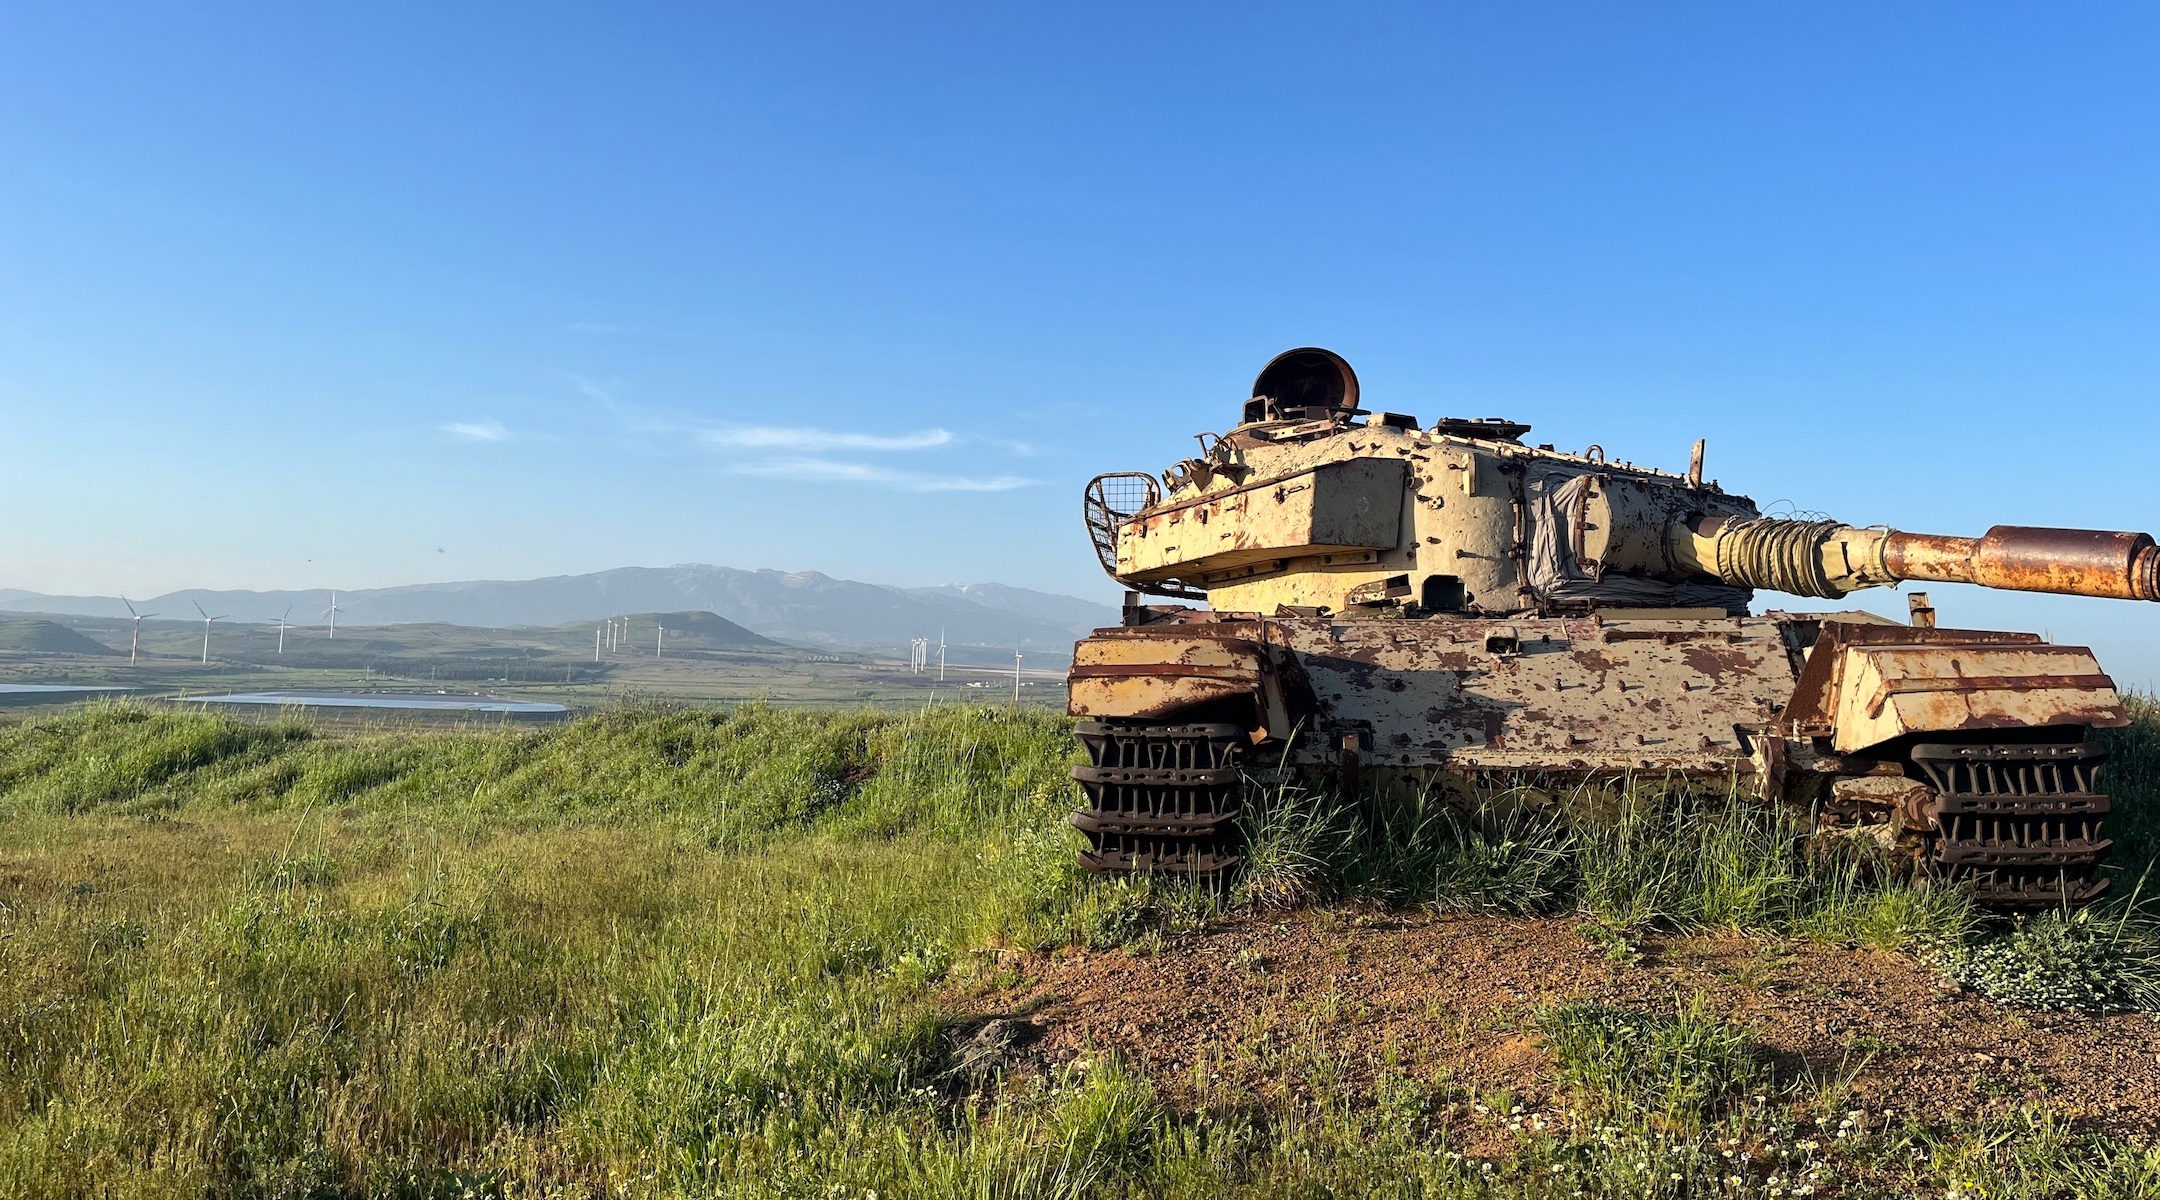 A rusting tank on a hill in the Golan Heights overlooking Syria is a vestige of an earlier war. The area last saw serious fighting during the 1973 Yom Kippur War. (Uriel Heilman)